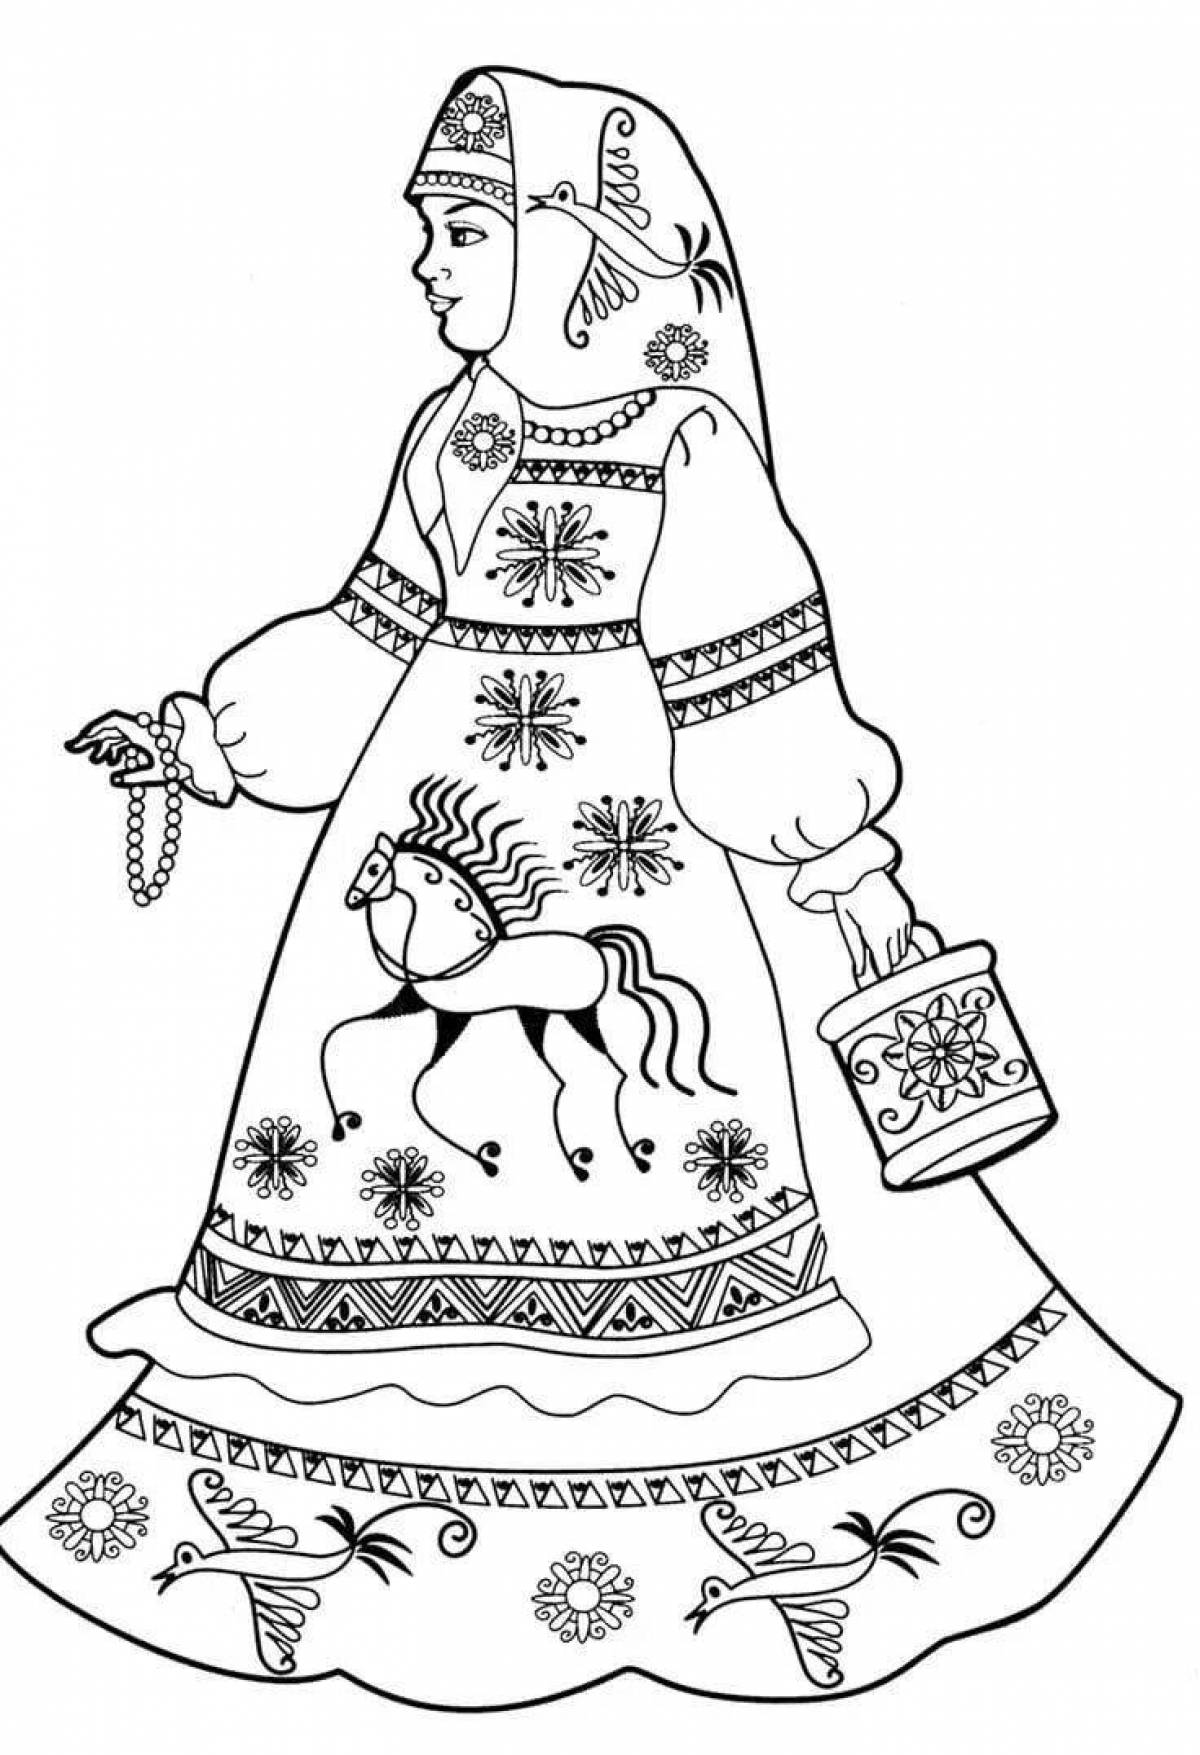 Coloring page festive Russian clothes